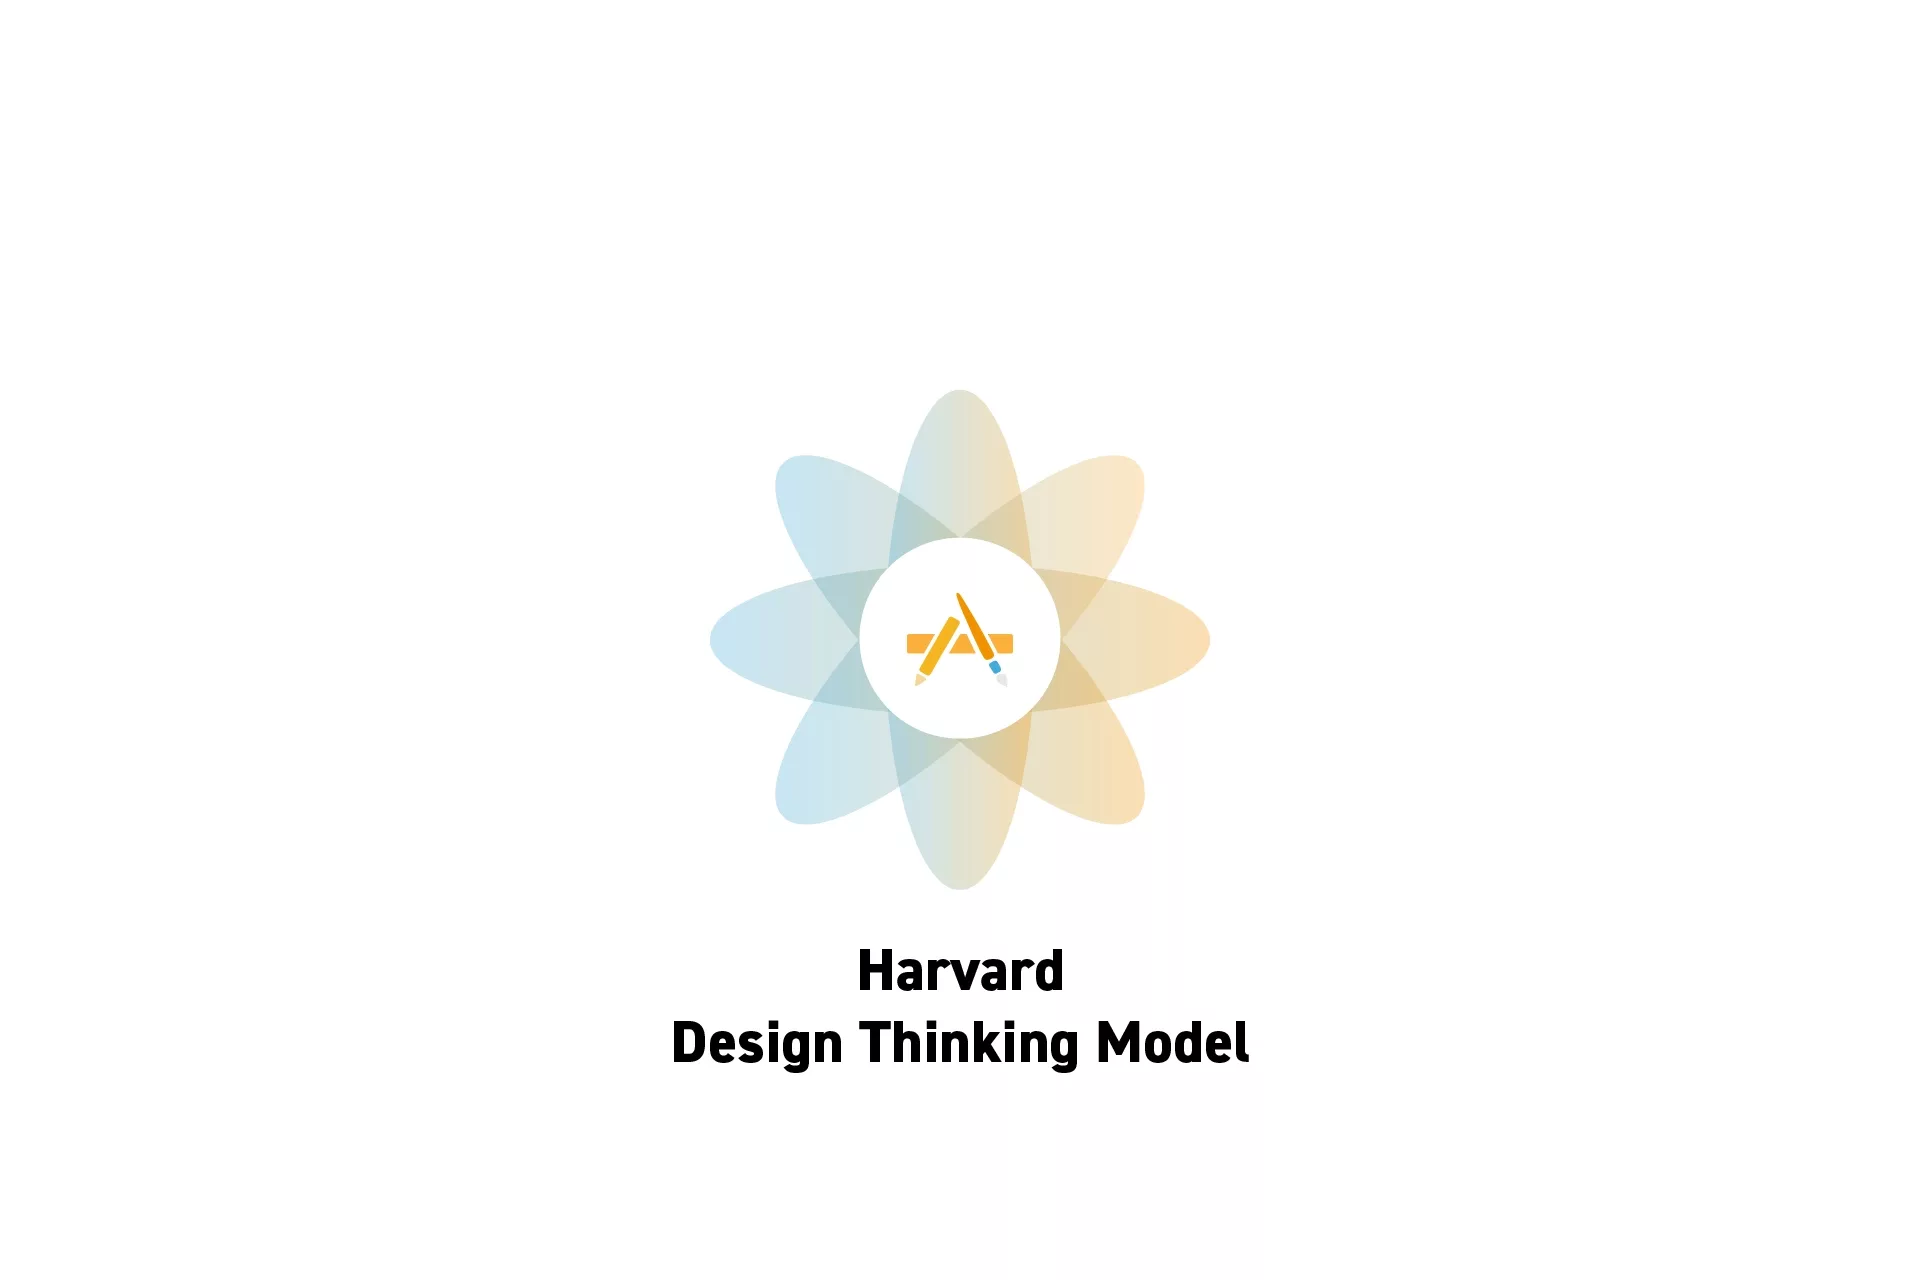 A flower that represents Digital Craft with the text “Harvard<br />Design Thinking Model” beneath it.